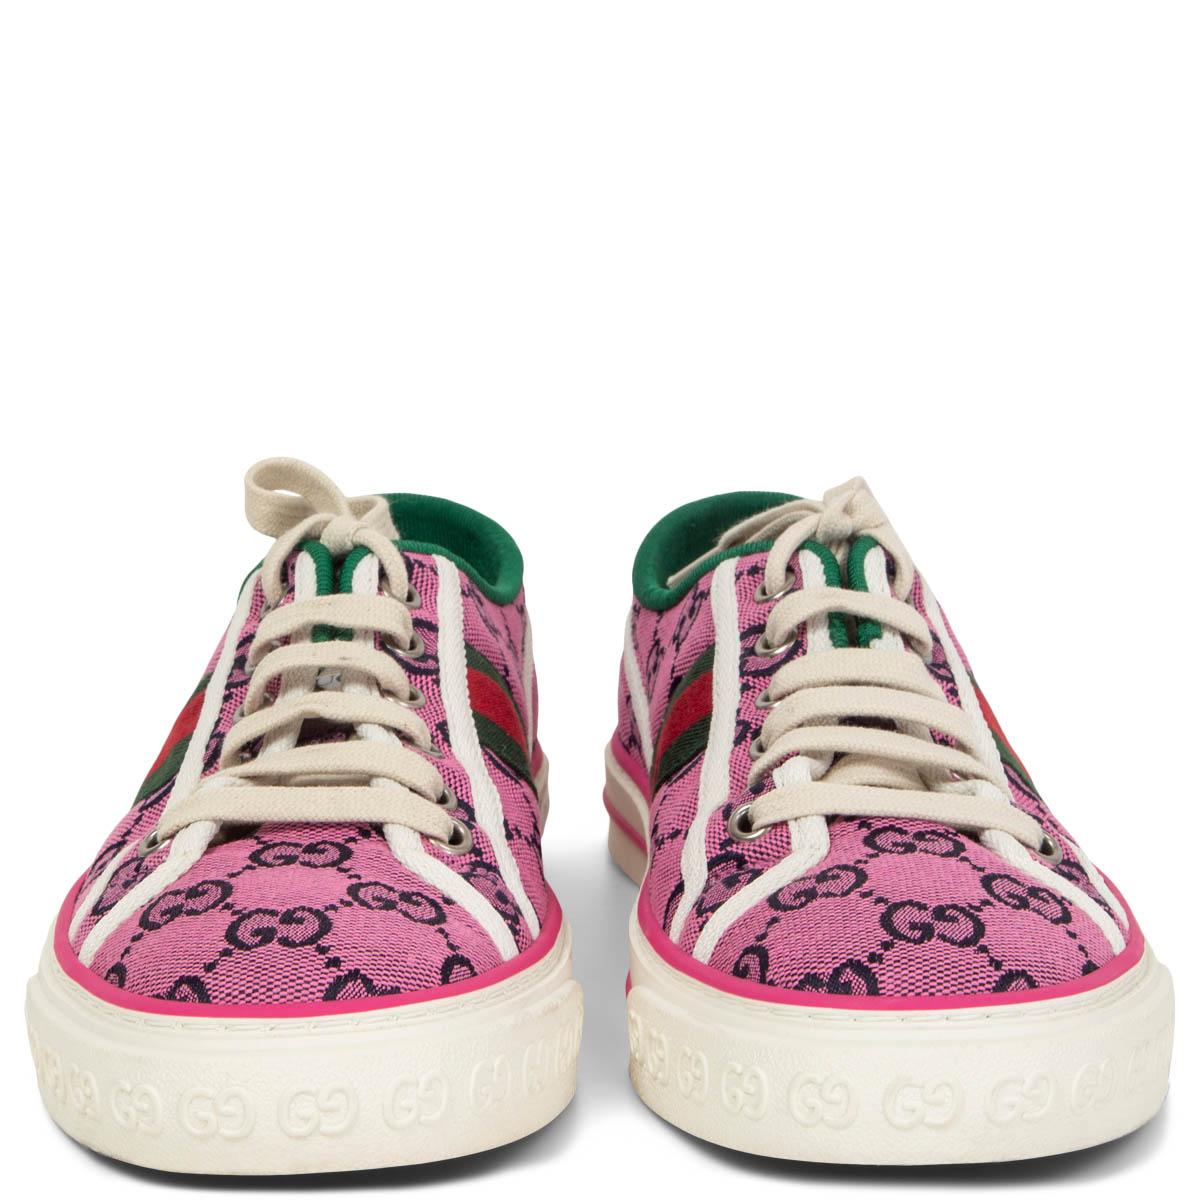 100% authentic Gucci Tennis 1977 GG sneaker crafted from pink and navy organic jacquard denim. With an allover GG motif and signature Web stripe on the side. Have been worn once and are in virtually new condition. Come with dust bag.